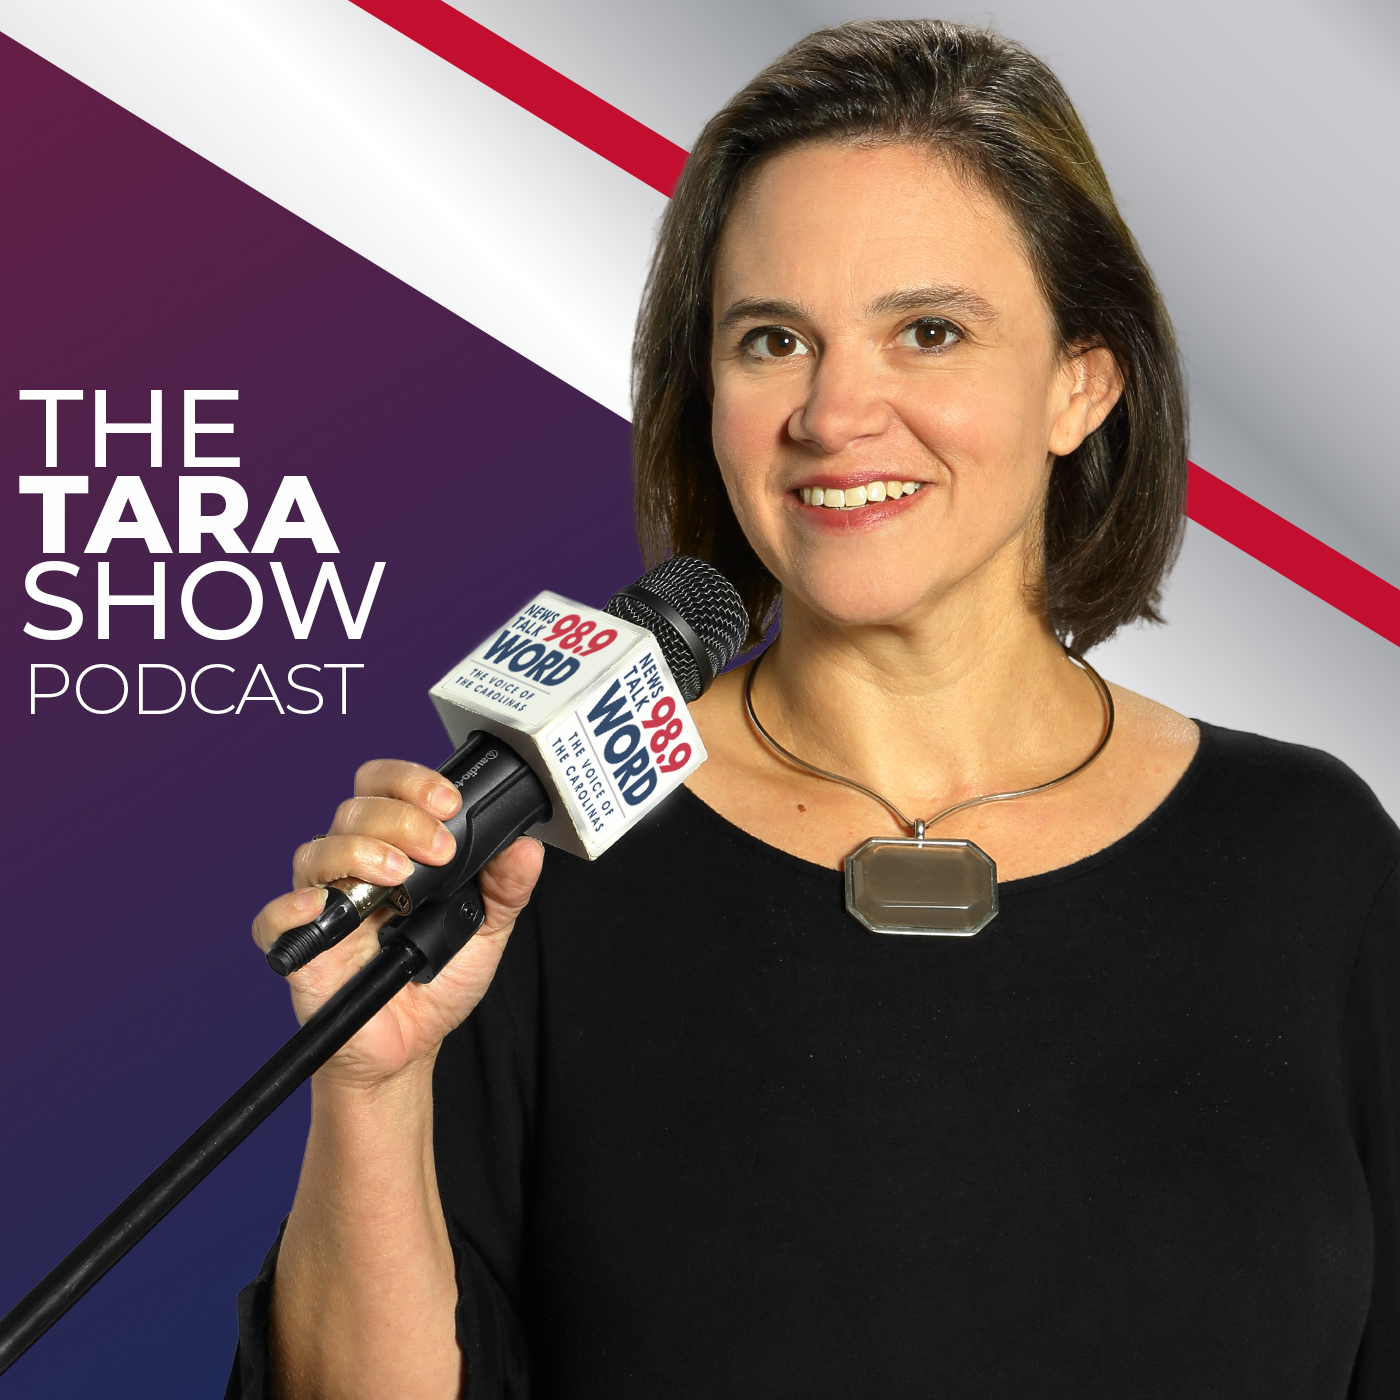 Hour 2: The Tara Show - “It’s a War! It’s a Battle” “Changes from Trump” “Ageism and Able Ability” “Breaking Free of Tyranny” 